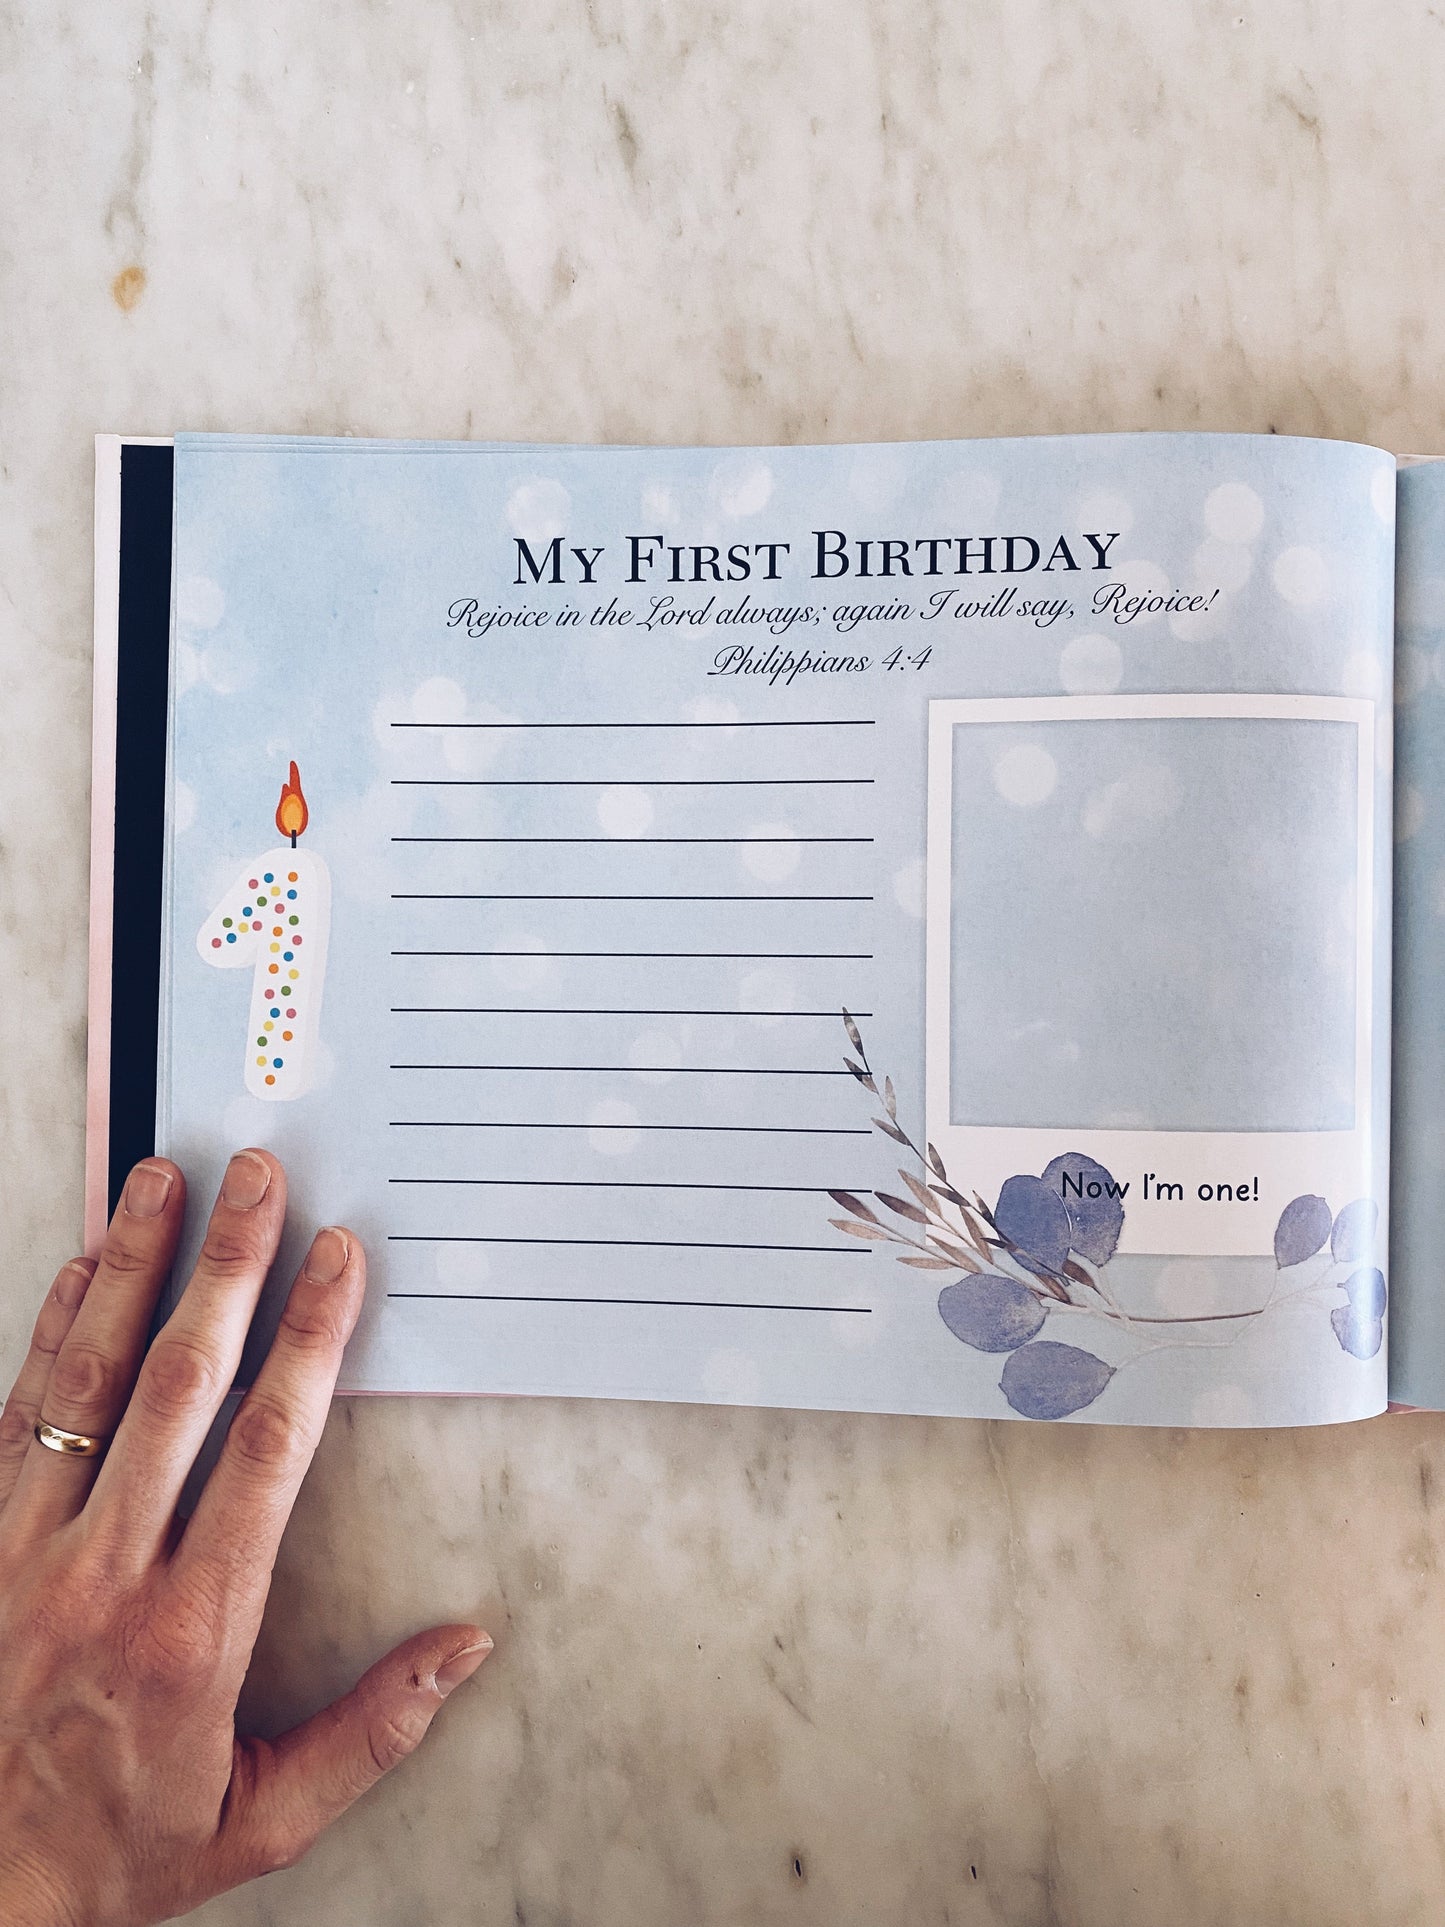 Personalized Catholic Baby’s Record Book